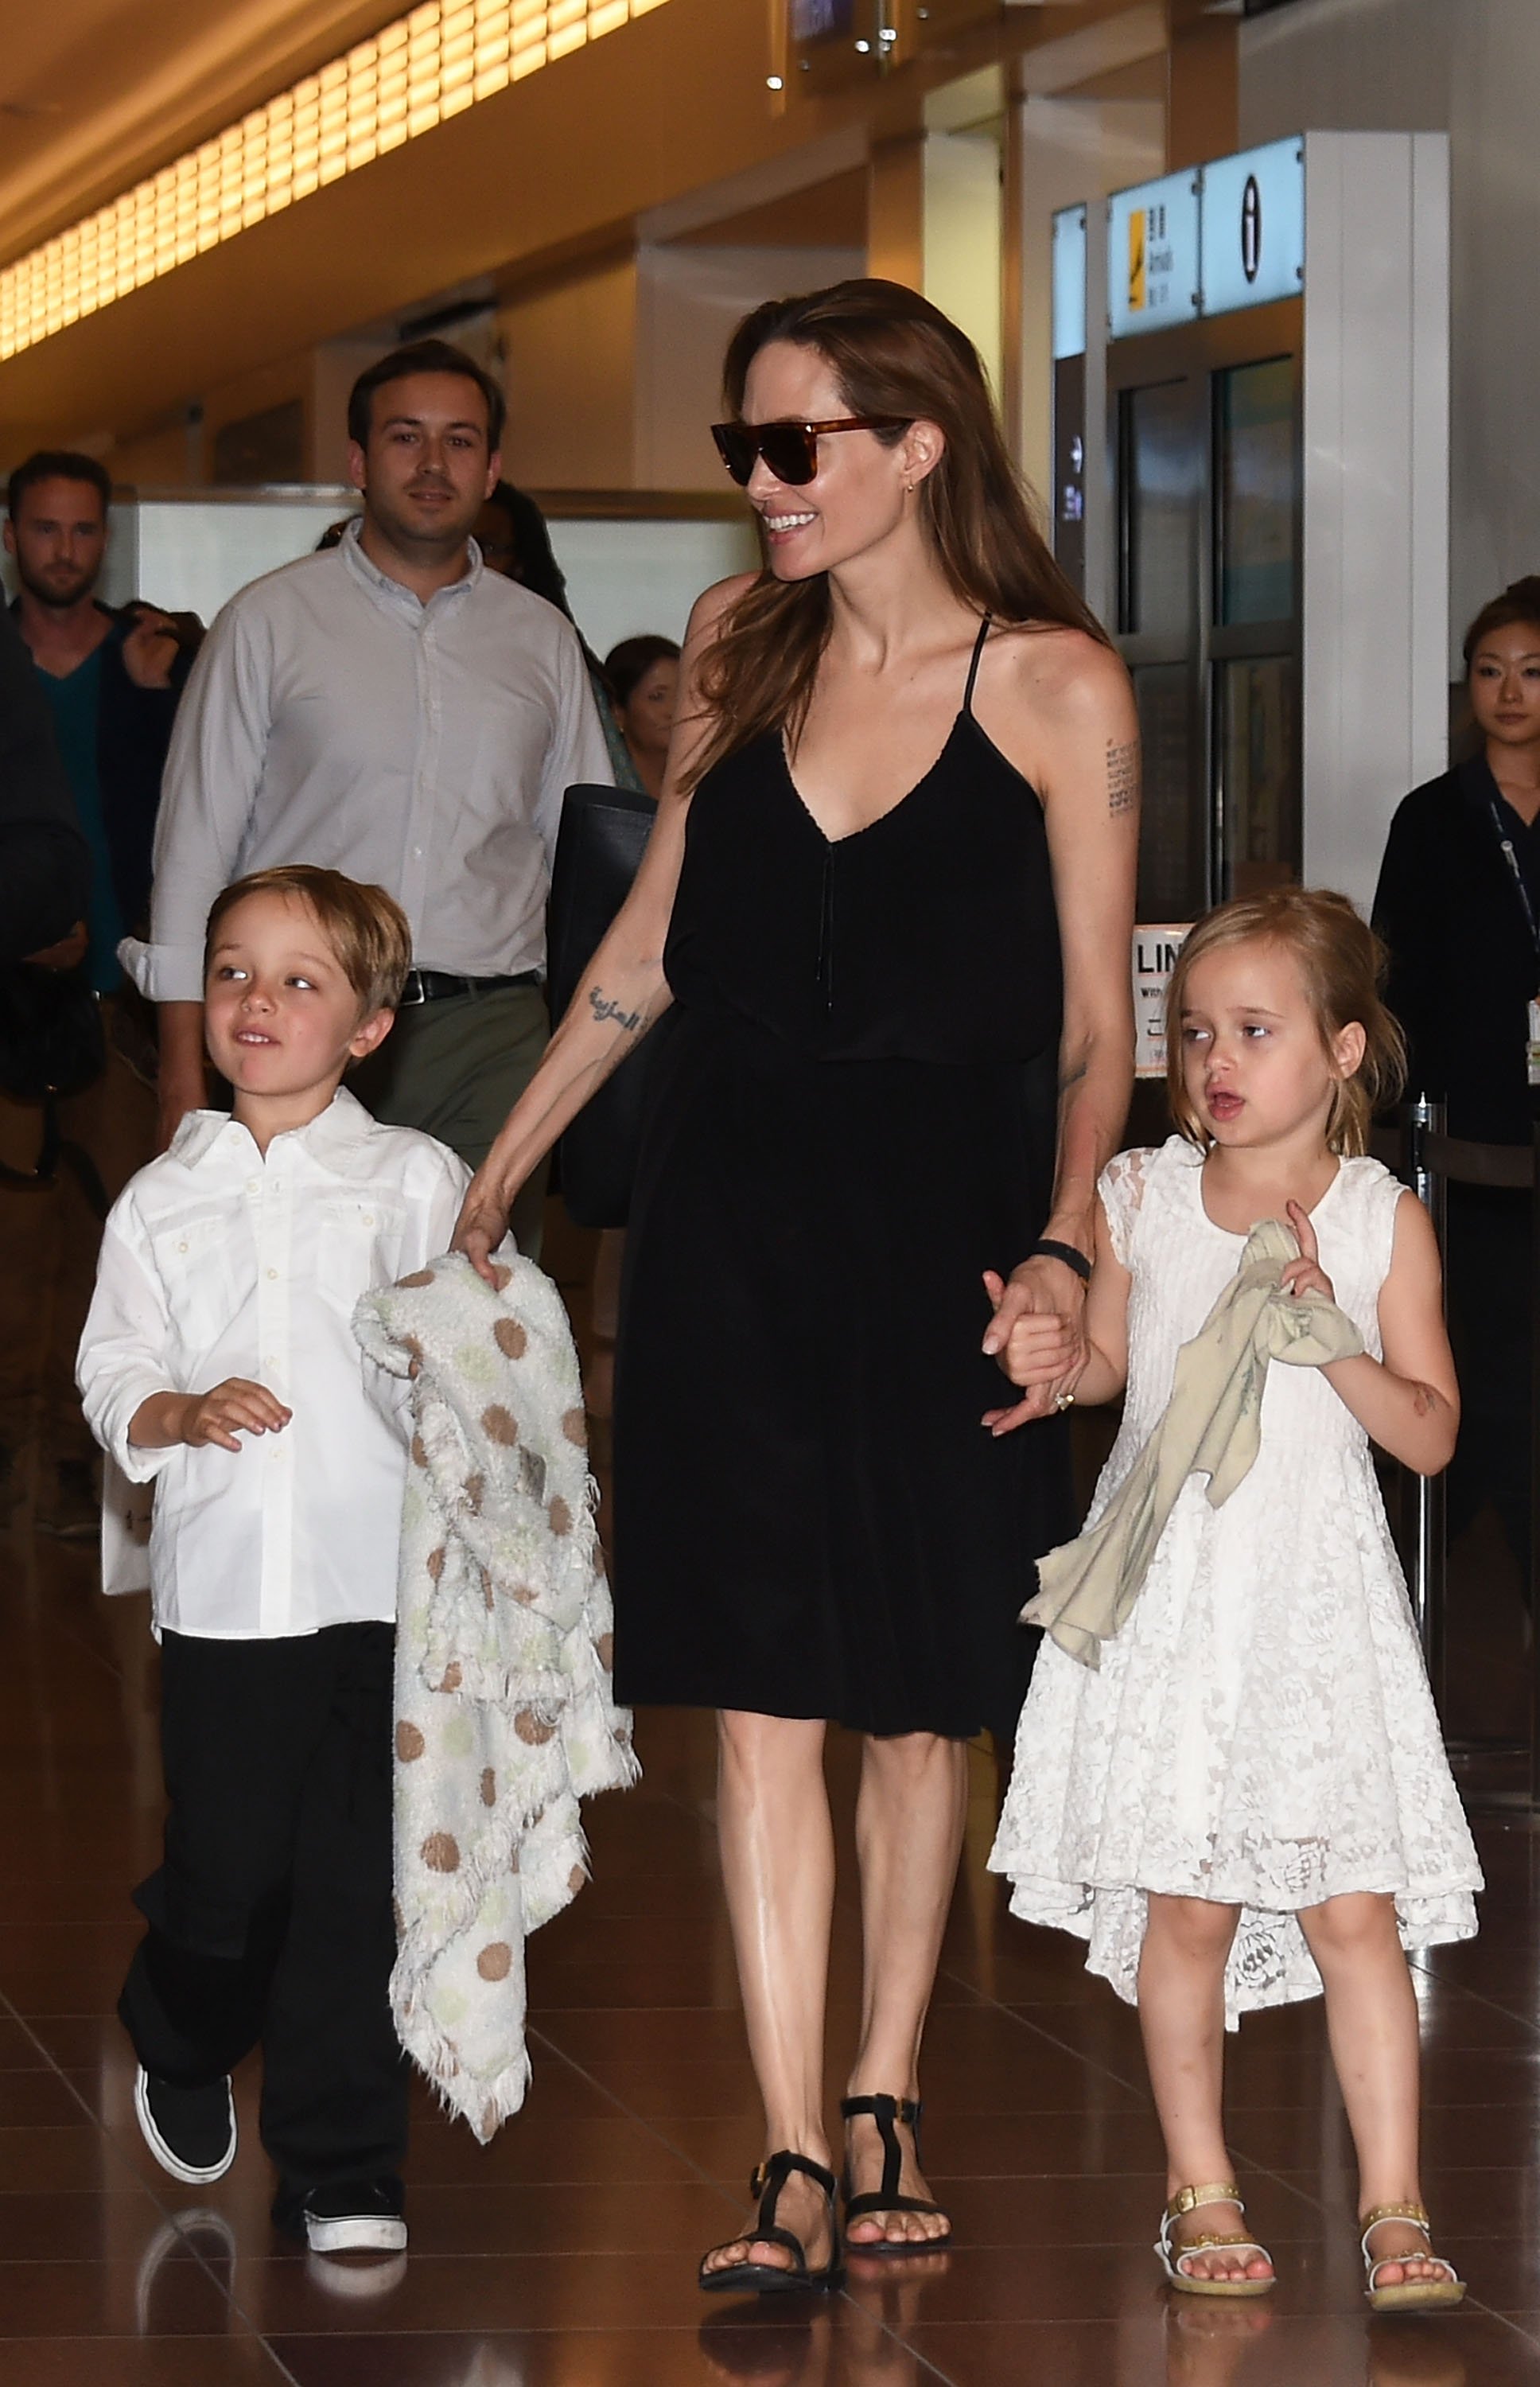 Knox Jolie-Pitt, Angelina Jolie and Vivienne Jolie-Pitt are seen upon arrival at Haneda Airport on June 21, 2014 in Tokyo, Japan. | Source: Getty Images